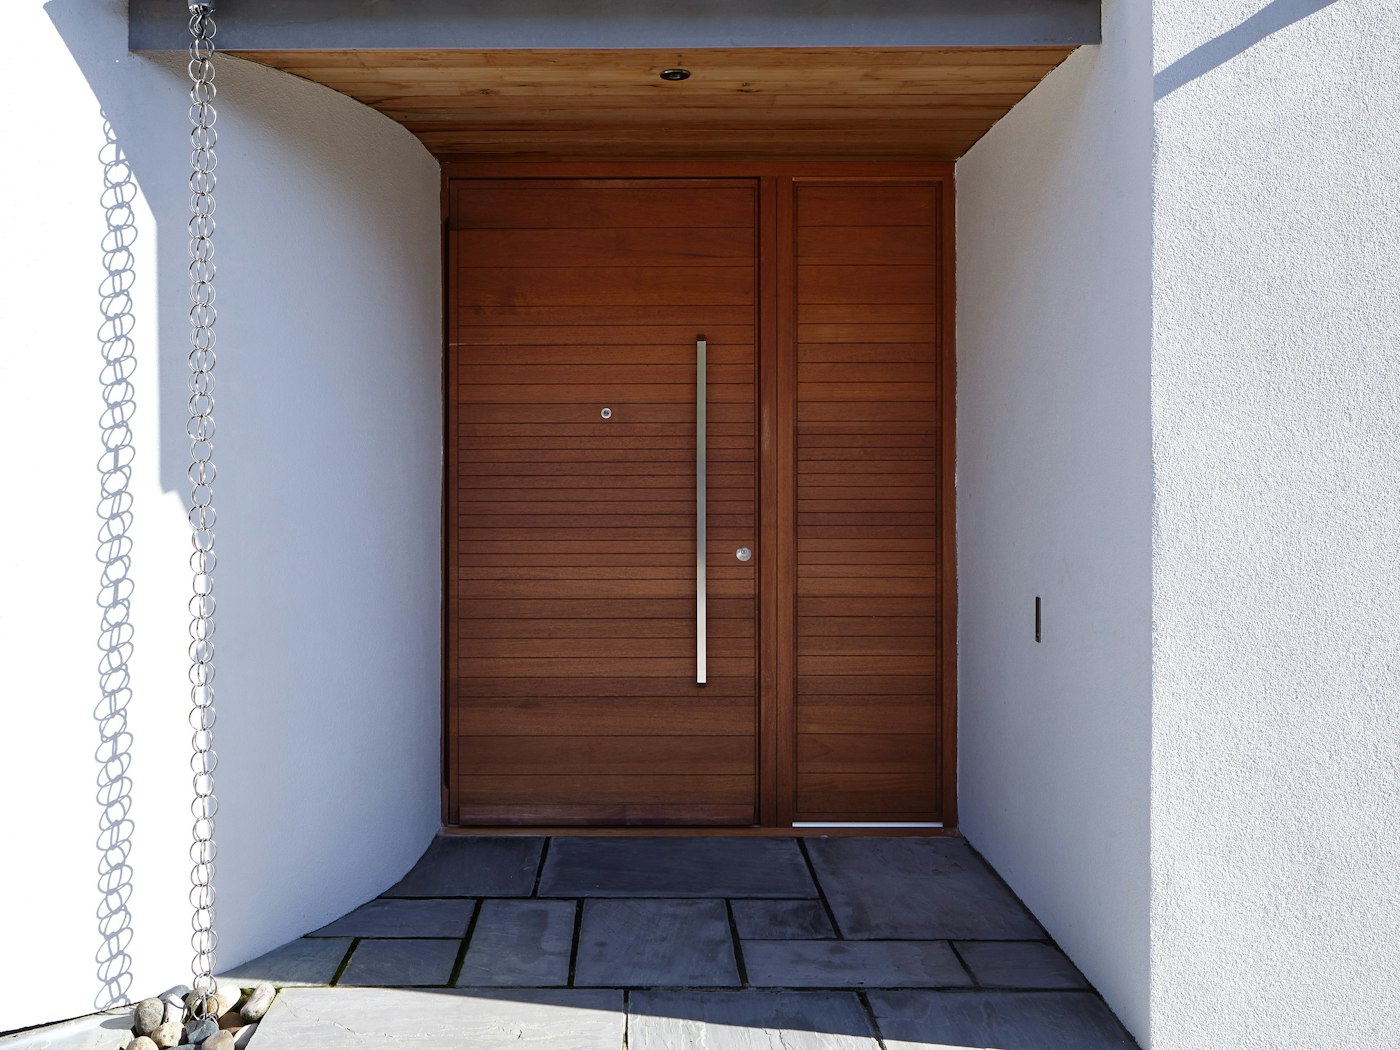 This iroko front door features a matching wood side panel to aid the perception of a wider opening